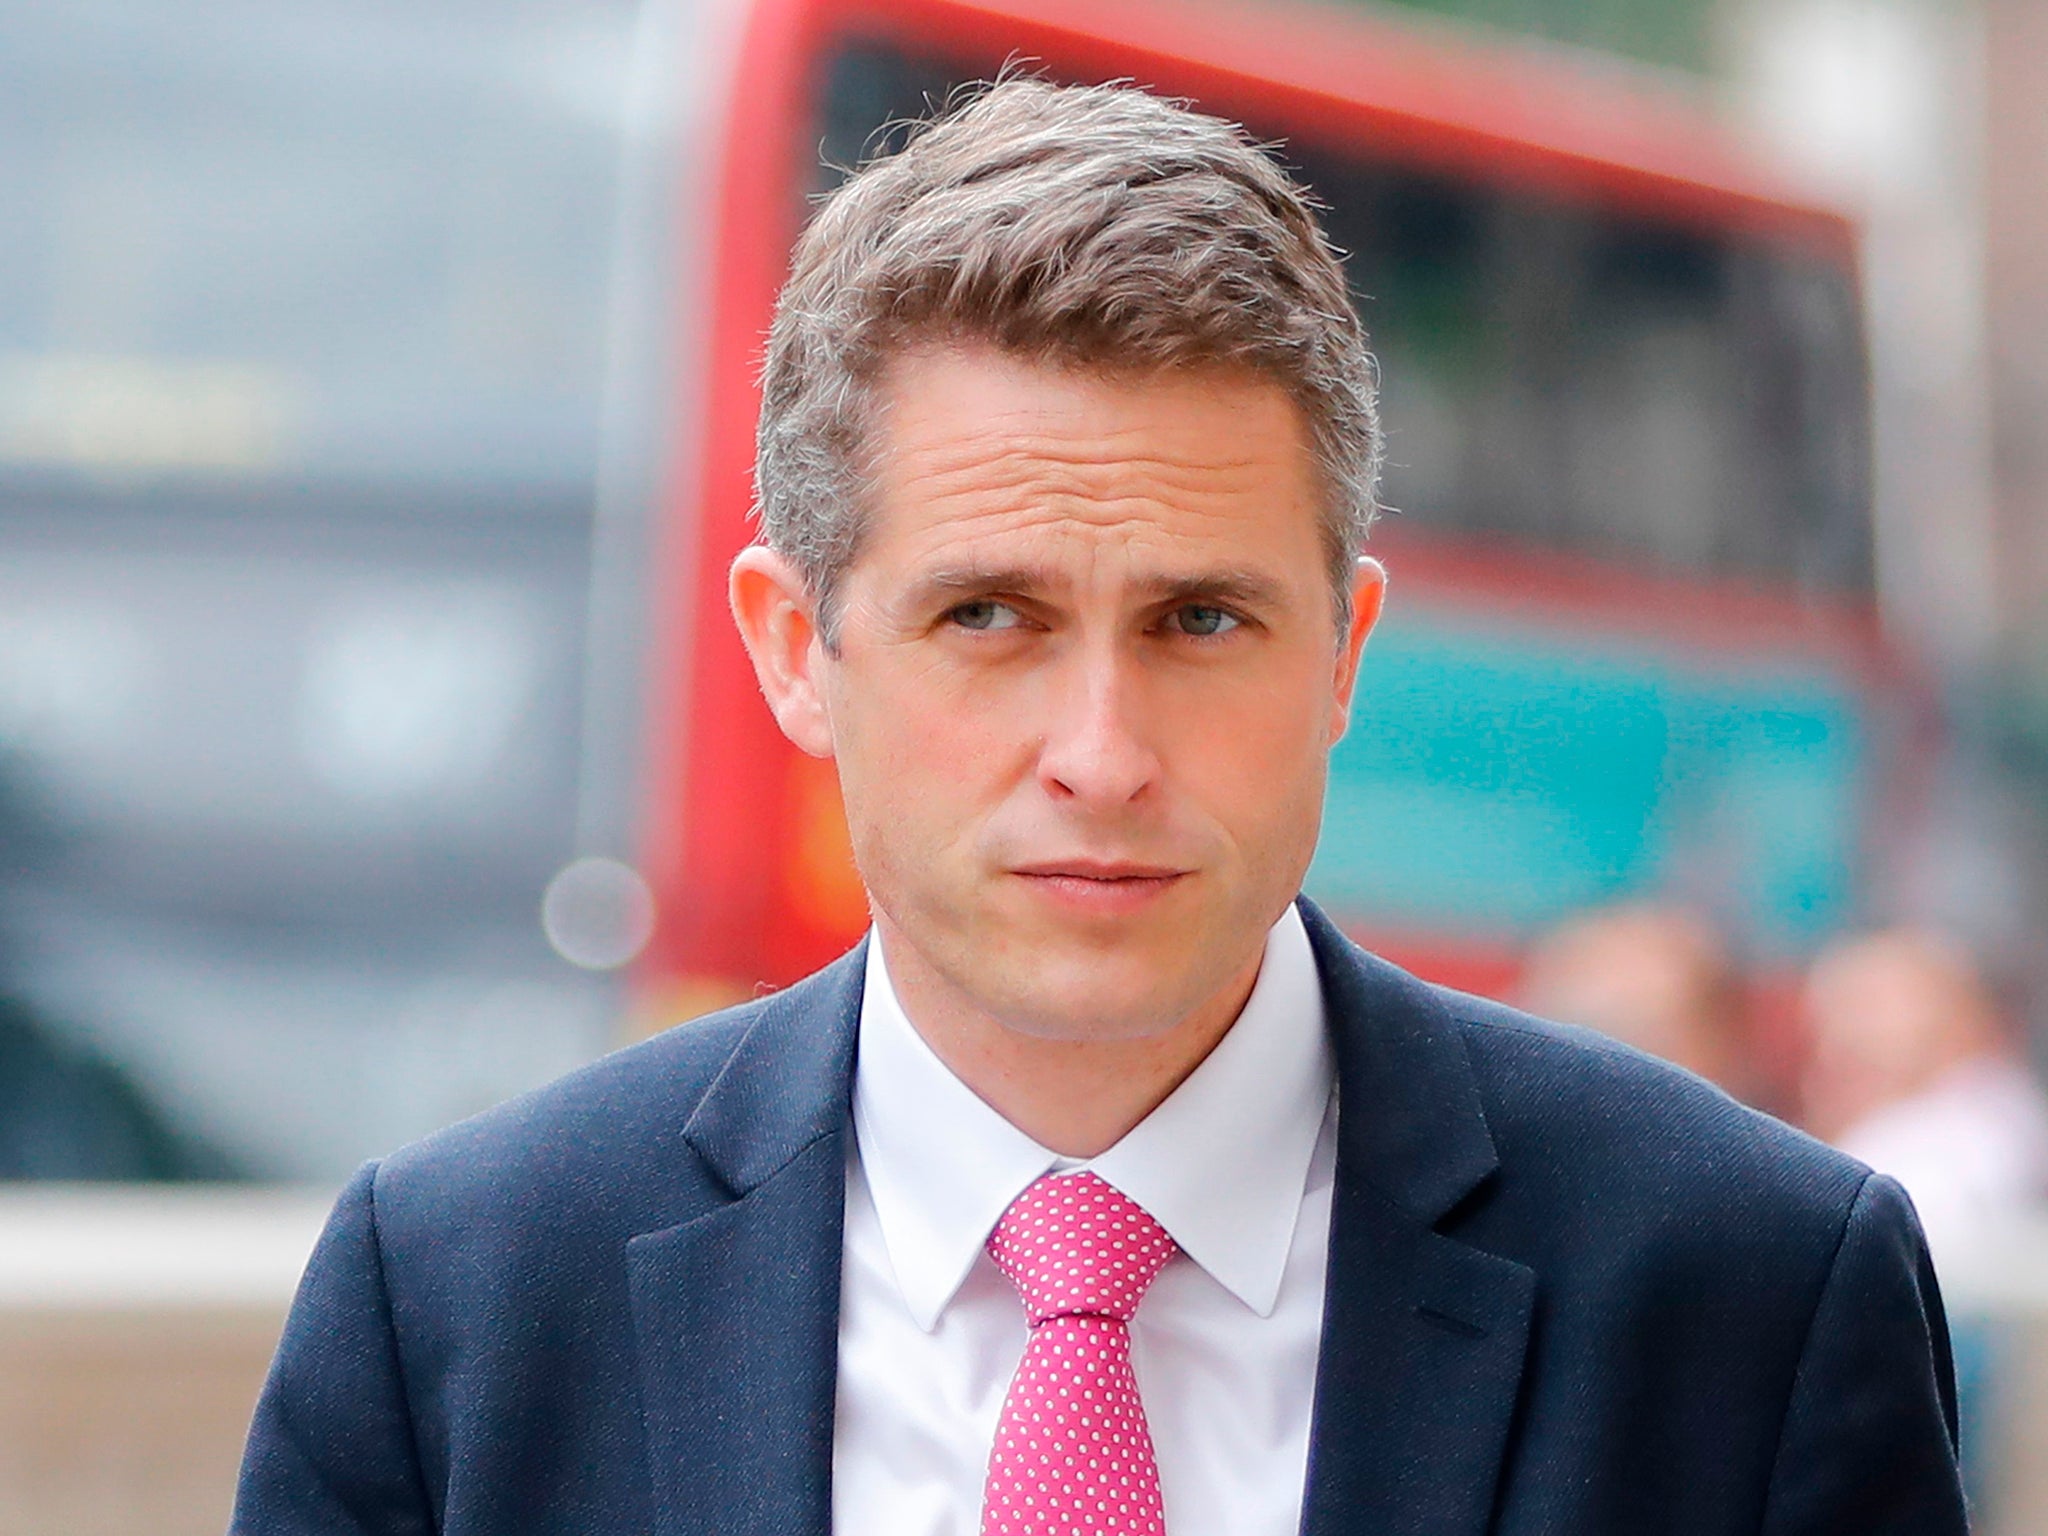 Labour rejects the suggestion by Gavin Williamson (pictured) that 'hunting down and killing' everyone who has fought abroad is a credible way to deal with terrorism